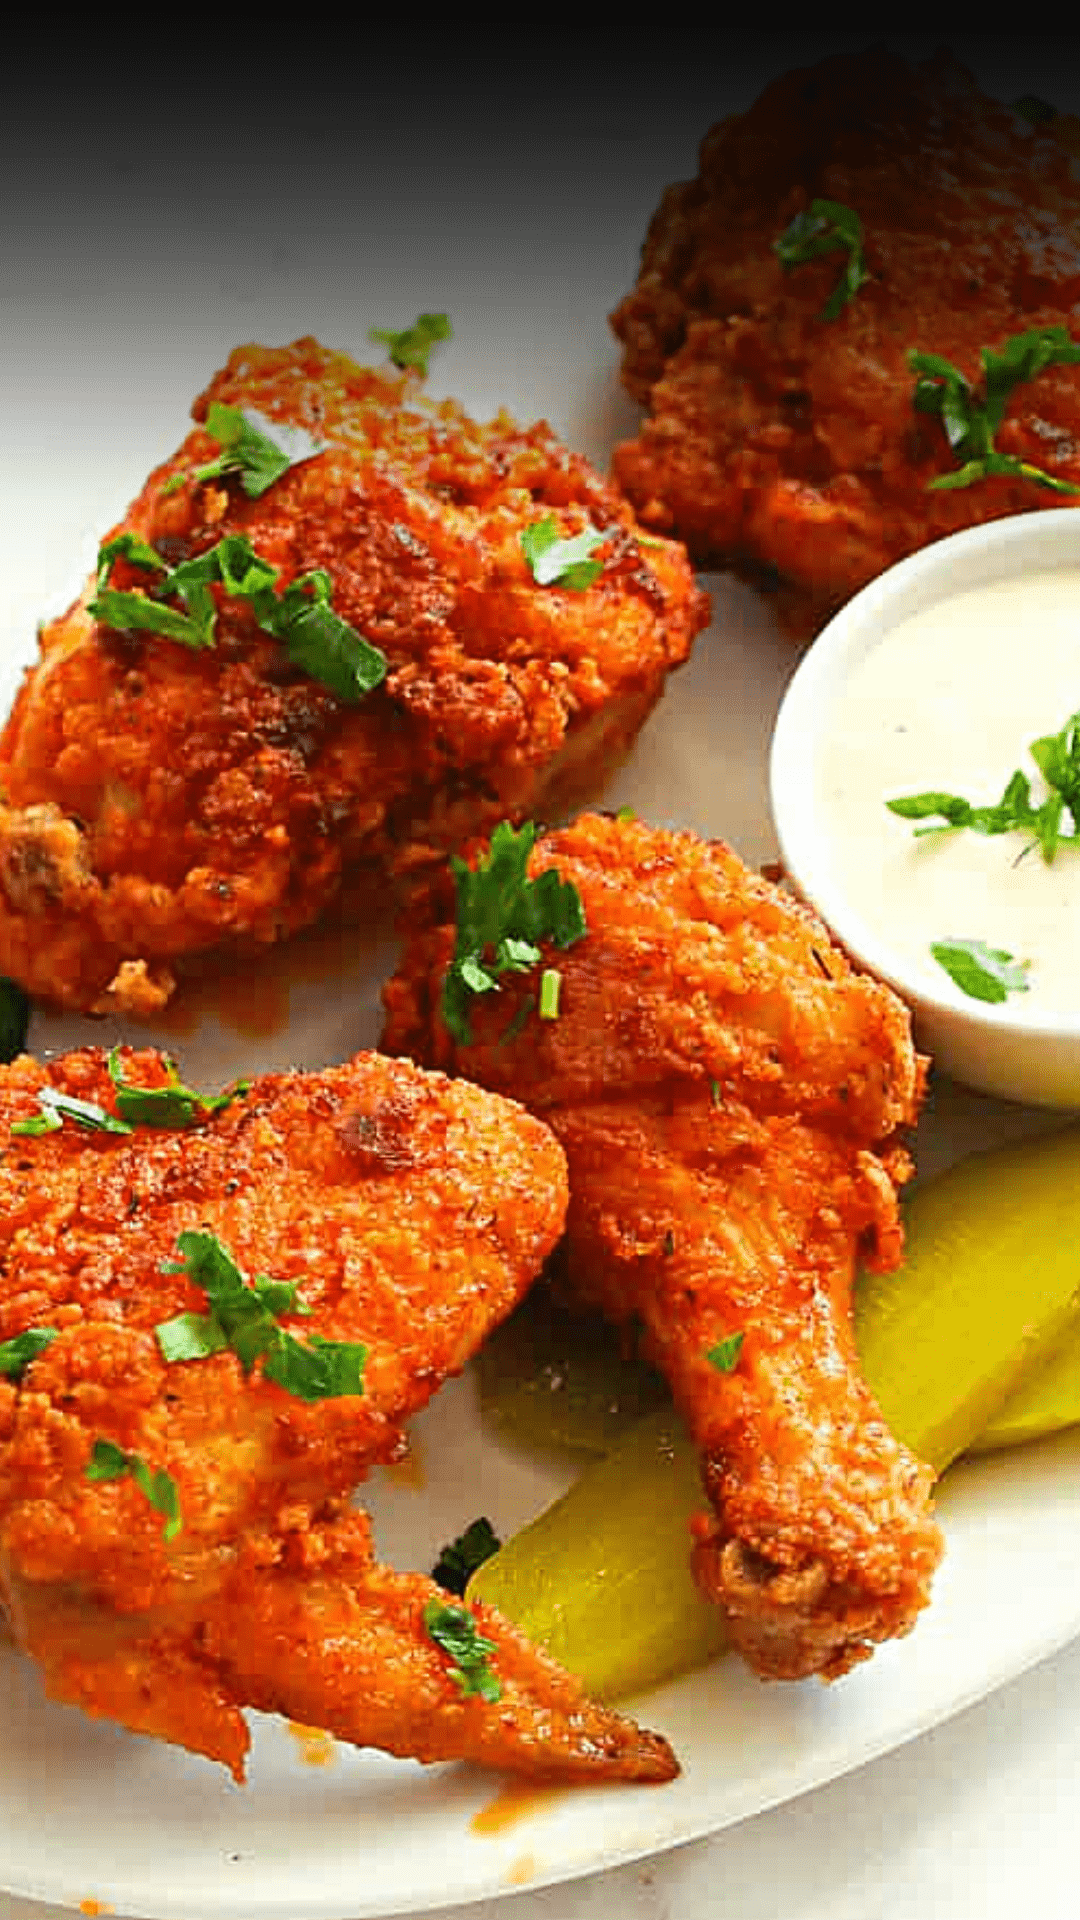 Southern Fried Chicken - Immaculate Bites